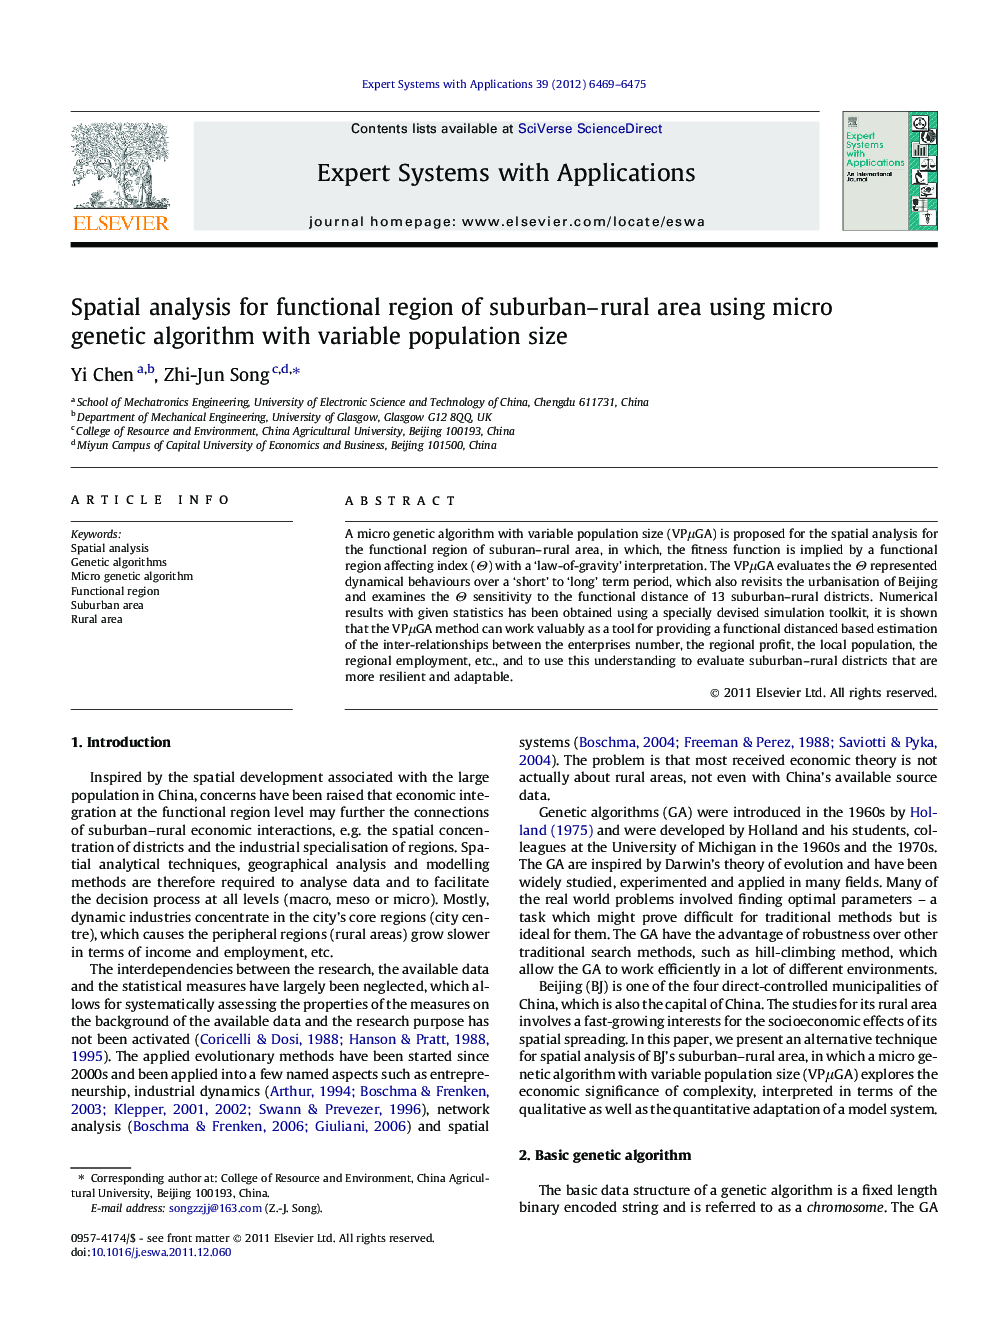 Spatial analysis for functional region of suburban–rural area using micro genetic algorithm with variable population size